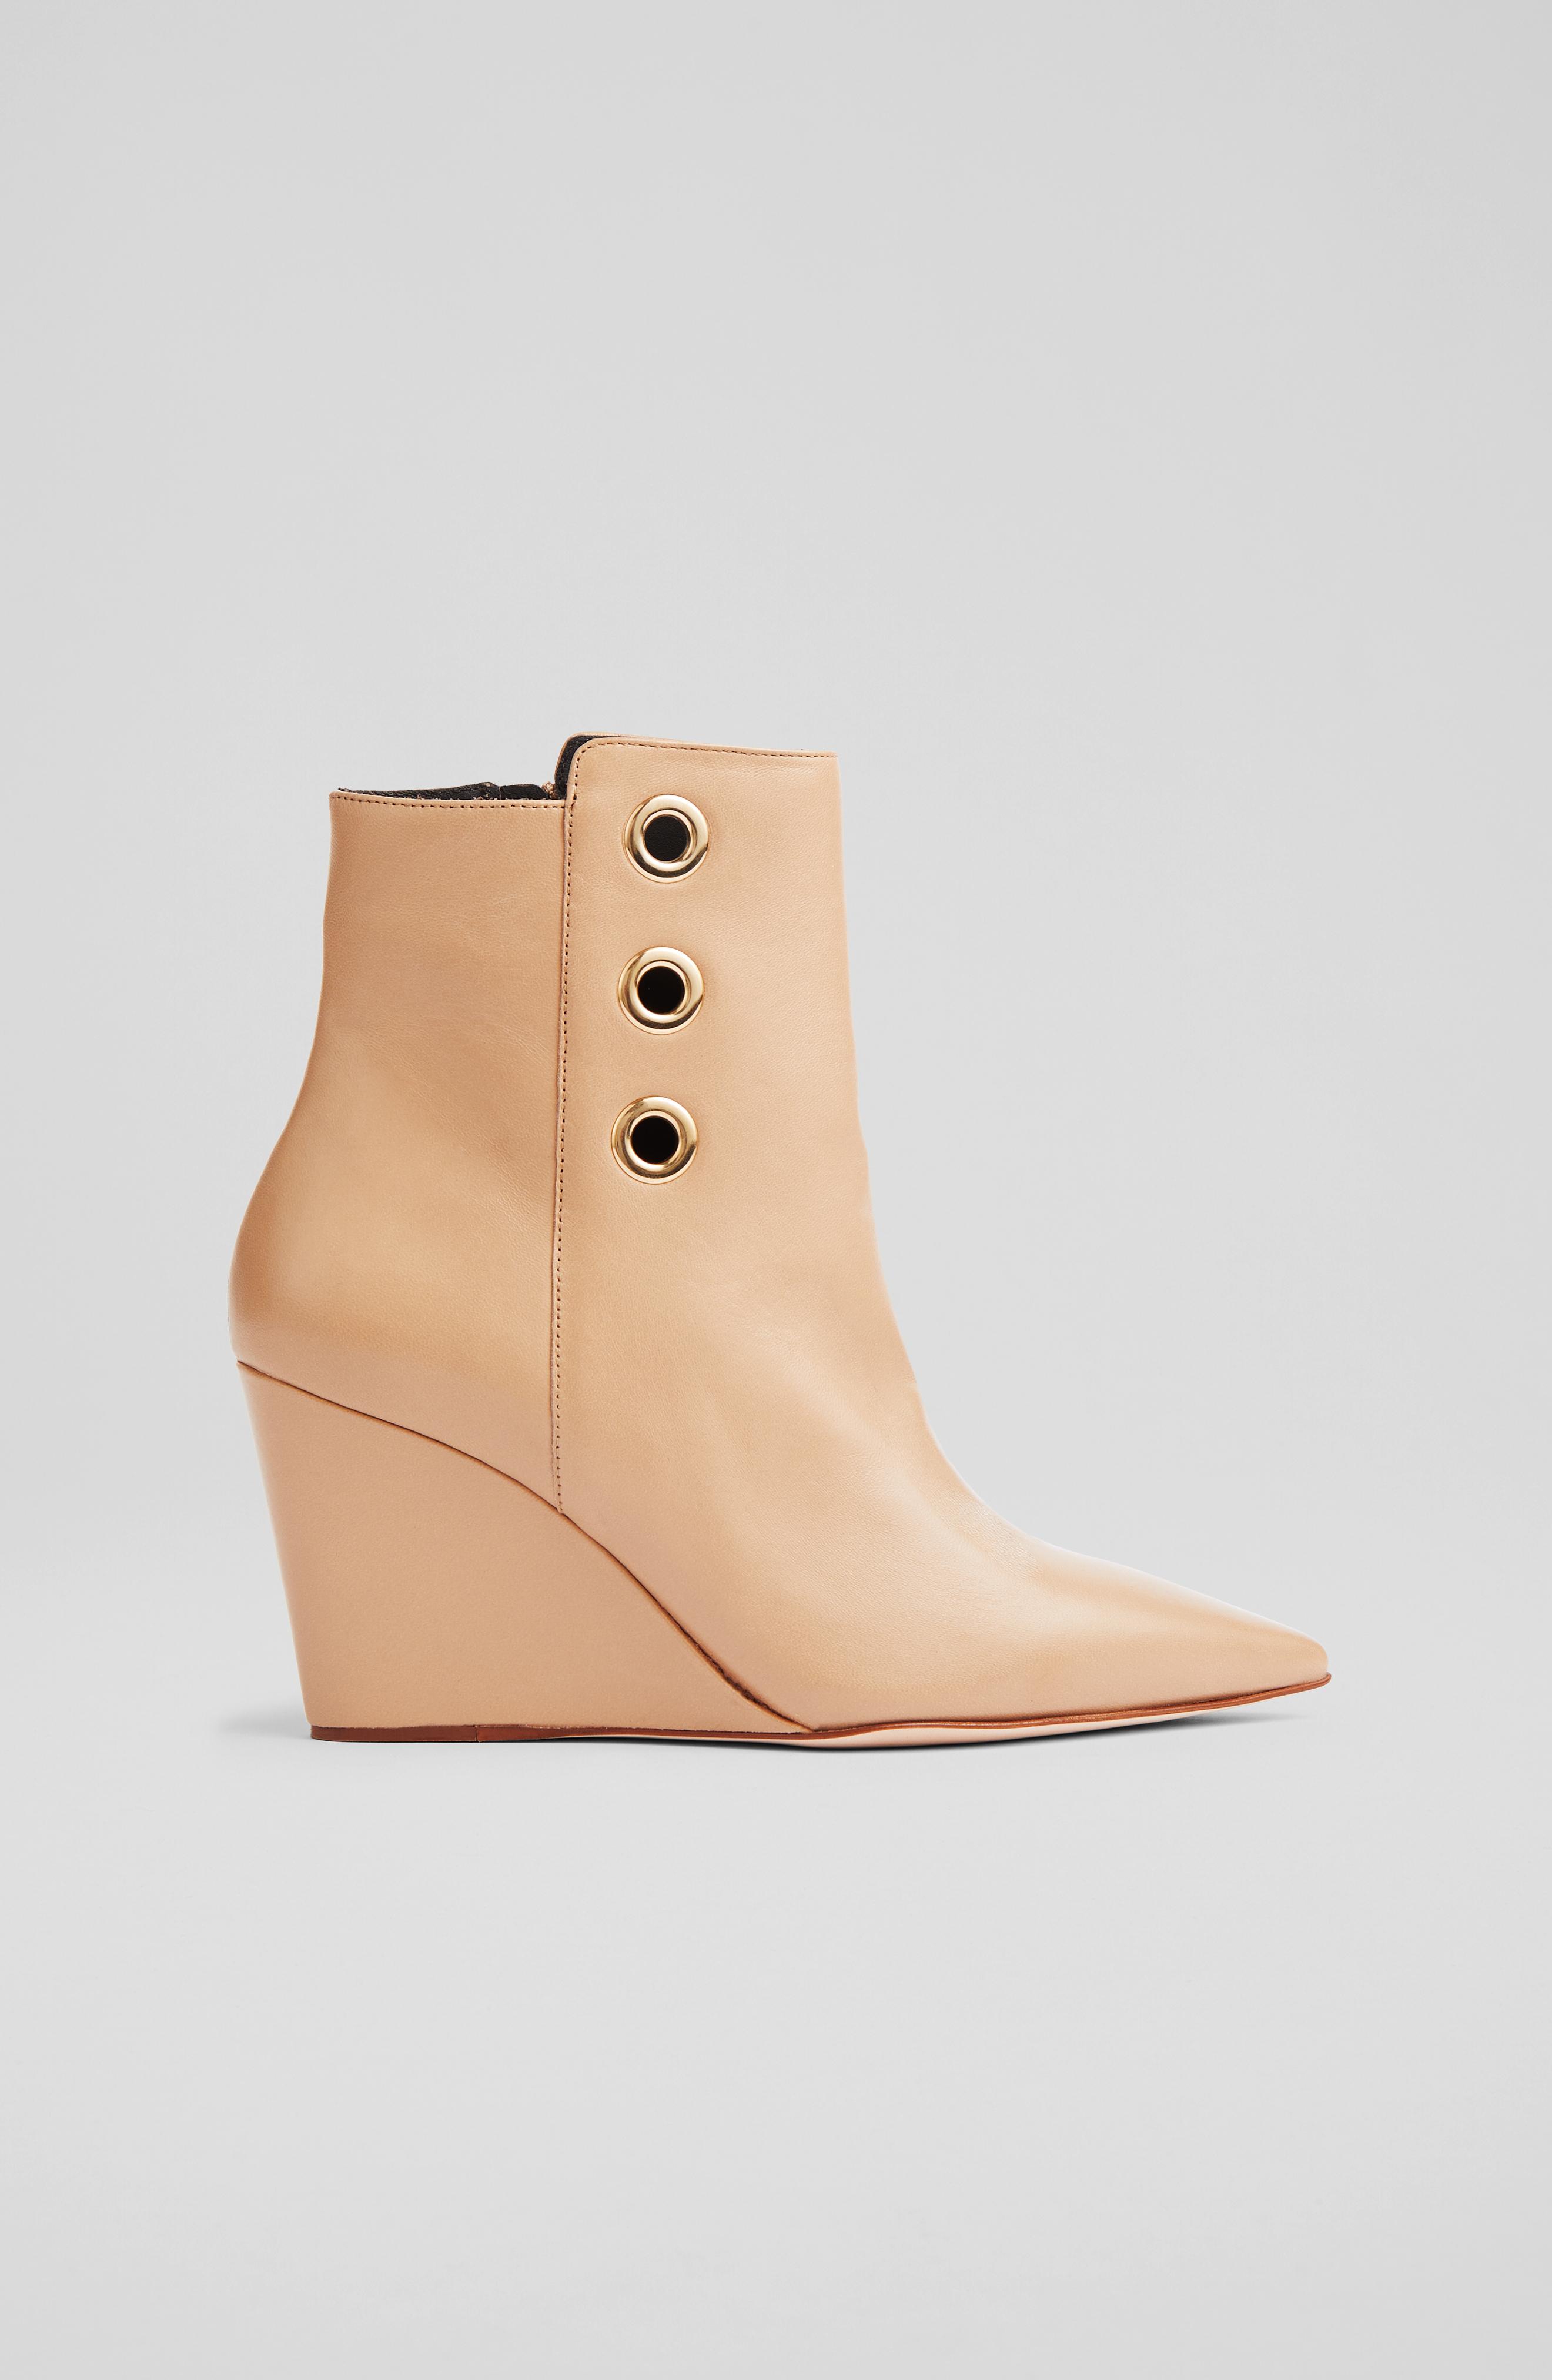 L.K.Bennett Brie Beige Leather Wedge Ankle Boots, Beige